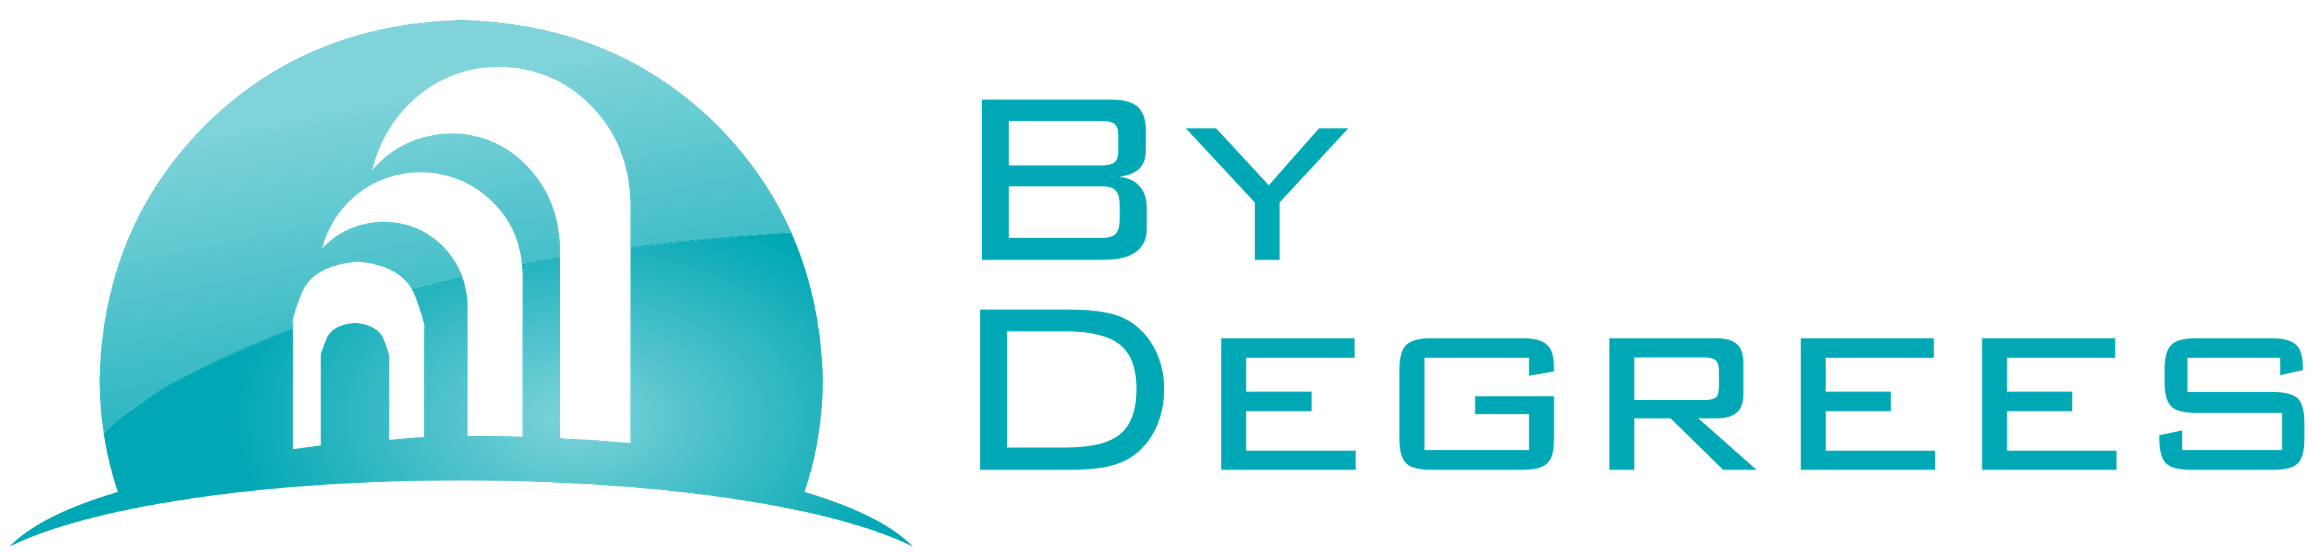 By Degrees logo